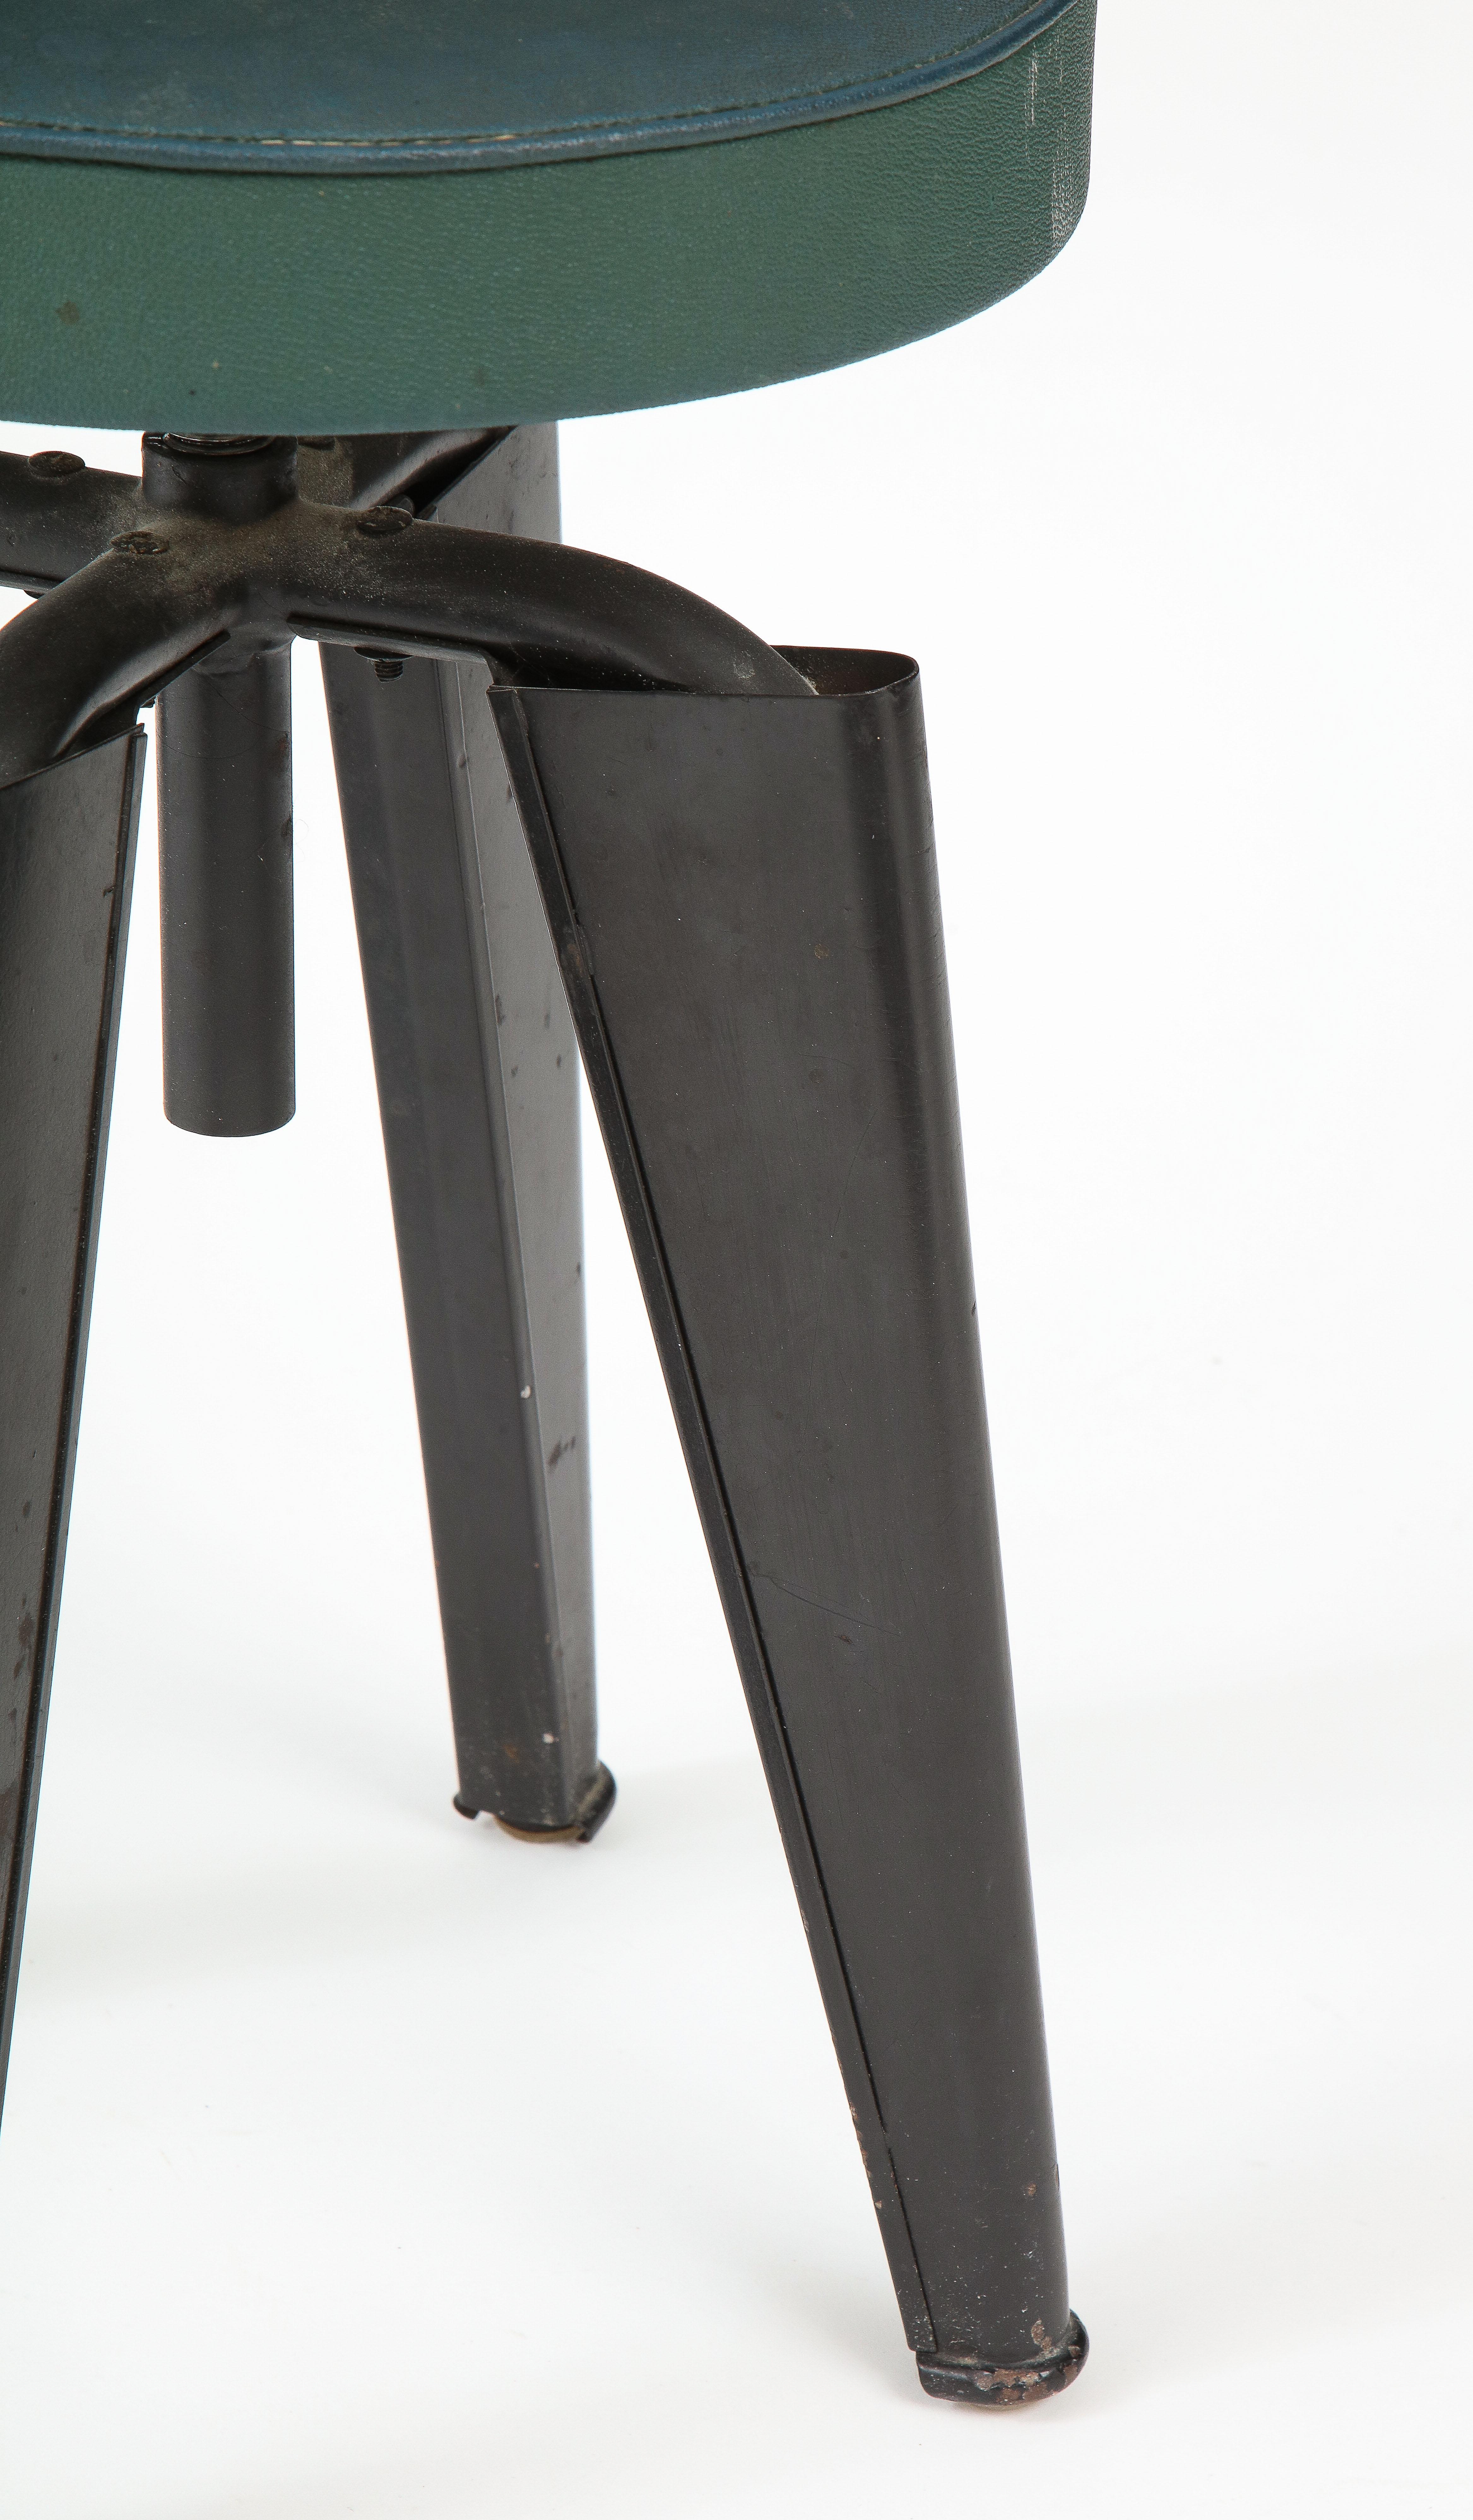 Maison Dominique 'Clemenceau' Stool, France, C. 1957 In Good Condition In Brooklyn, NY